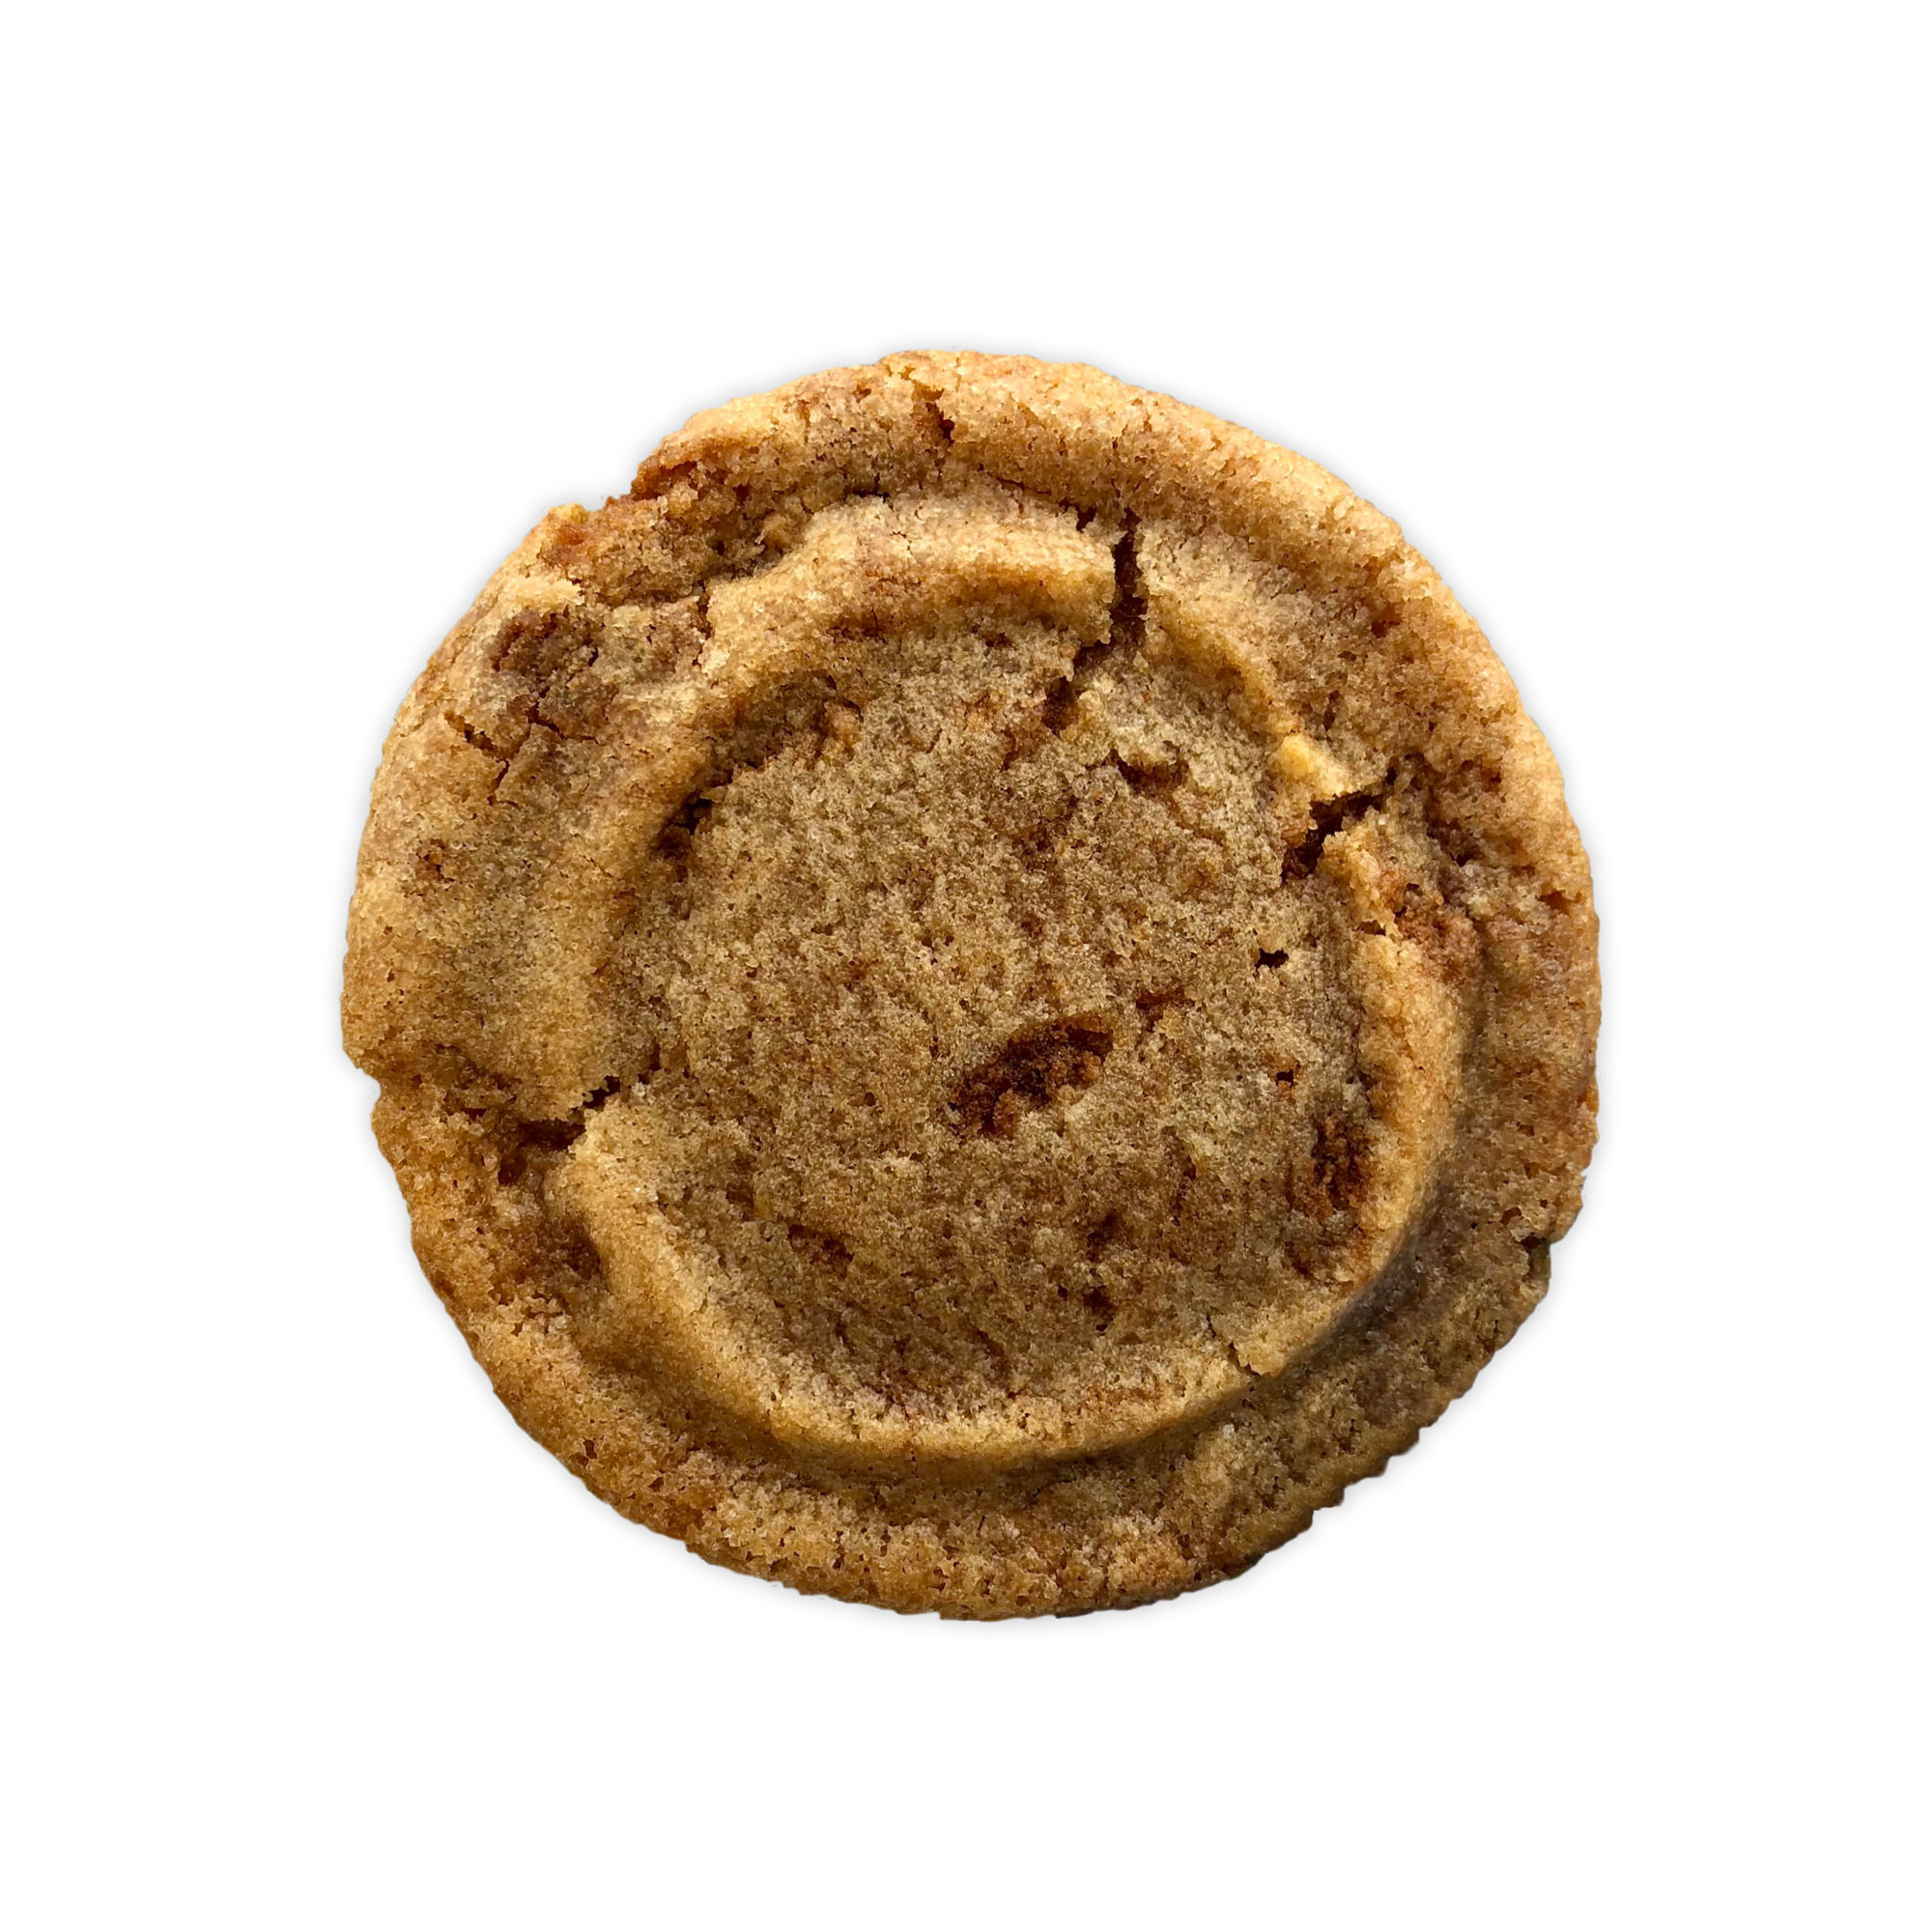 Are Lotus Biscoff Cookies & Cookie Butter Vegan? - thank you berry much